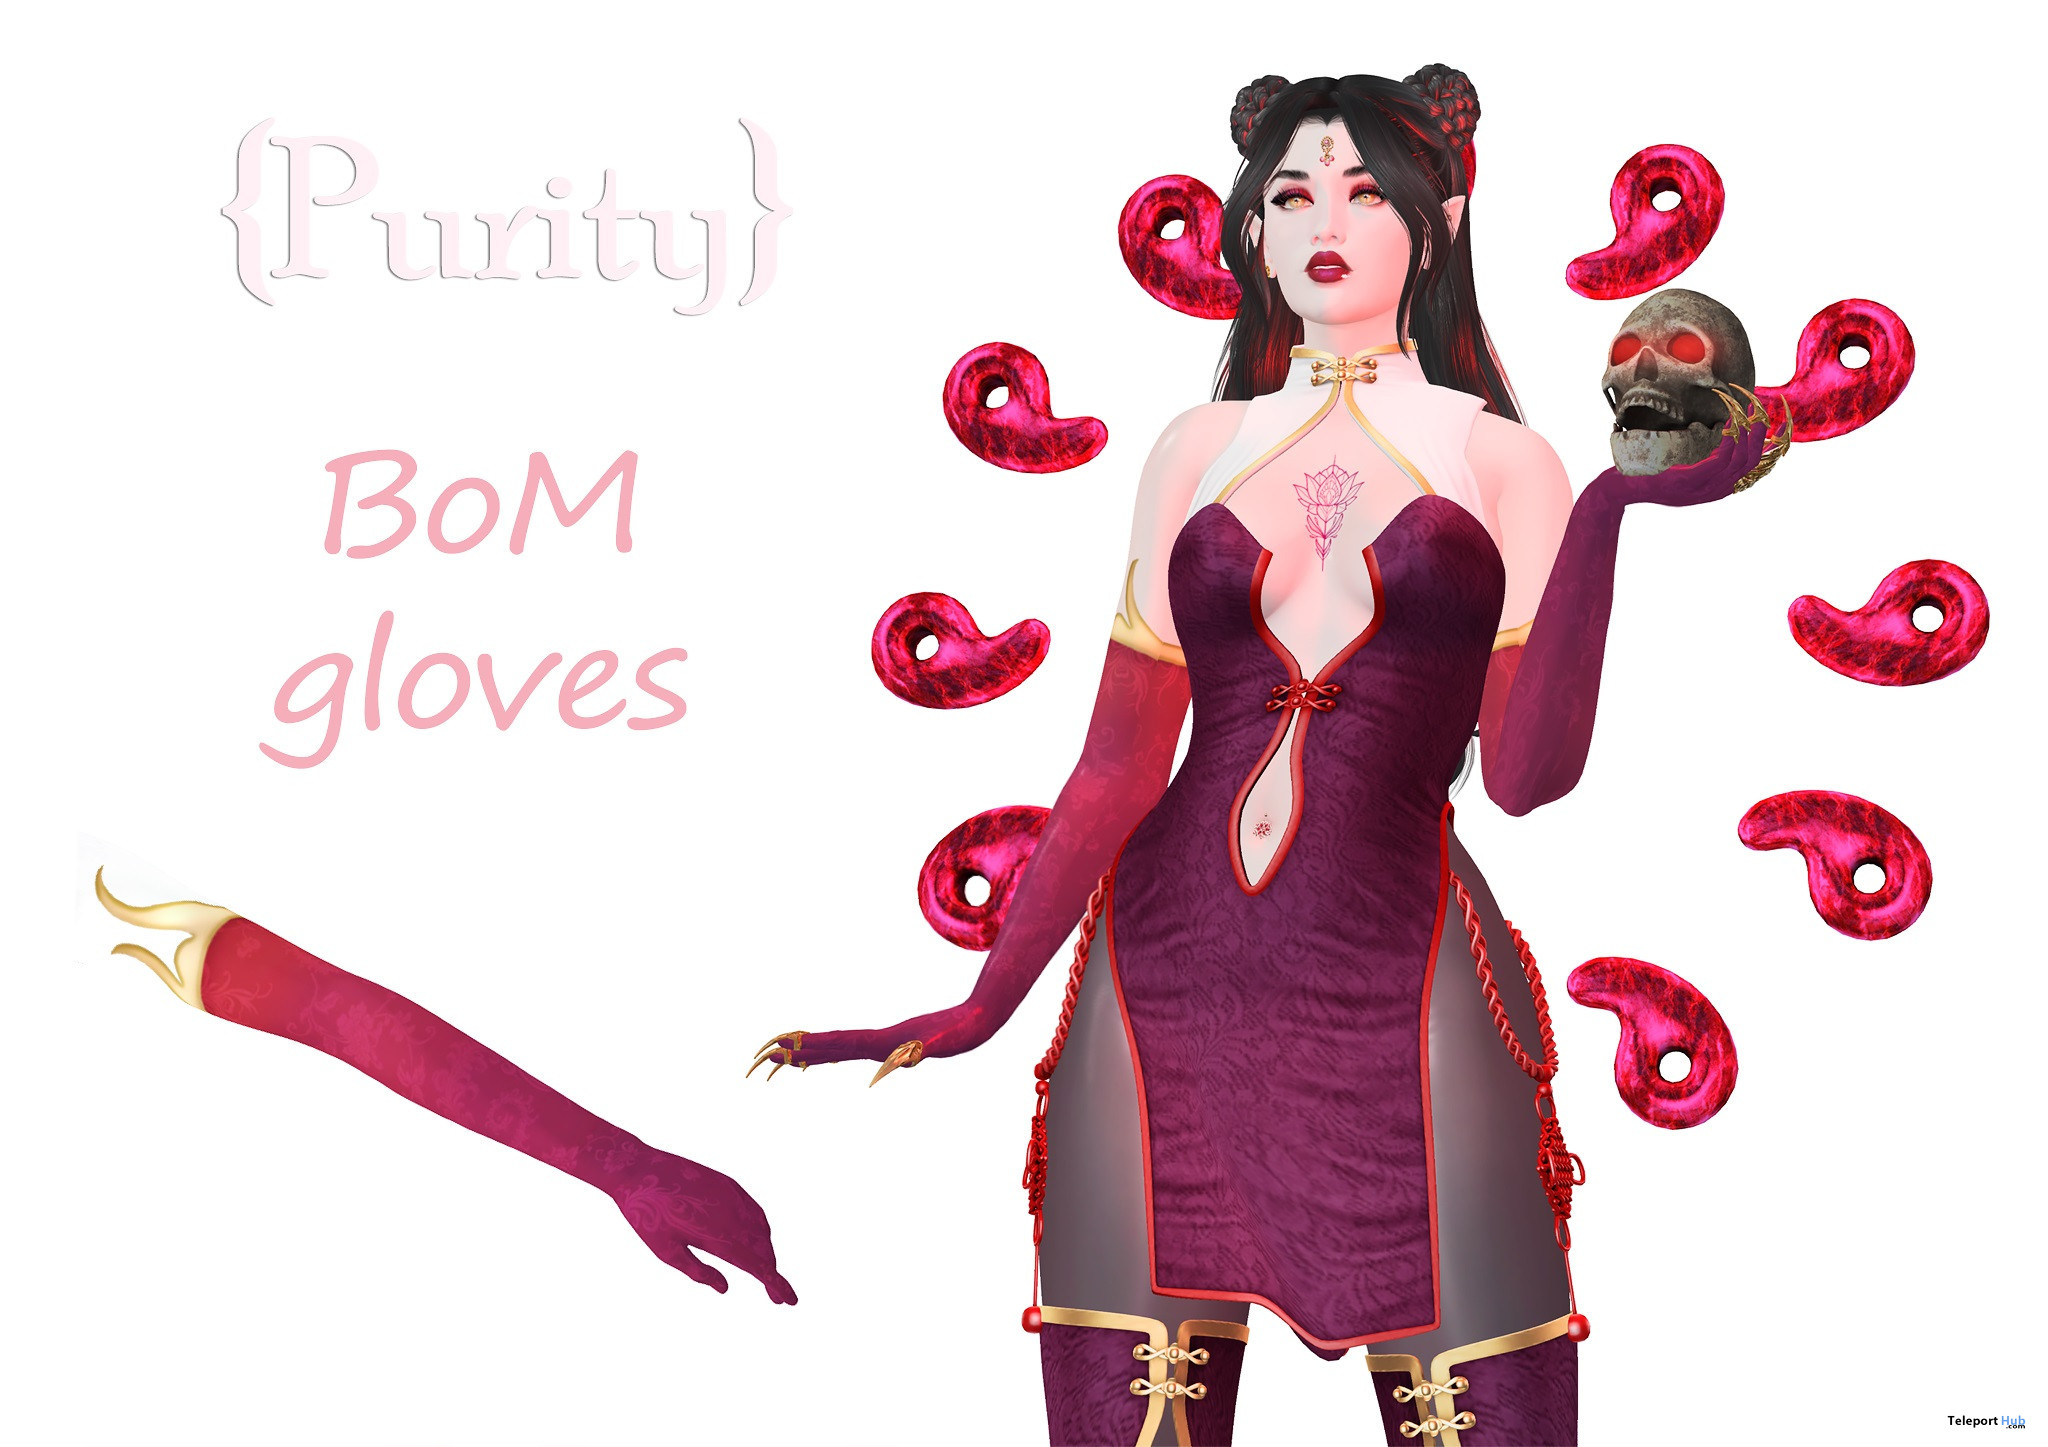 BOM Gloves Wine October 2022 Gift by {Purity} - Teleport Hub - teleporthub.com